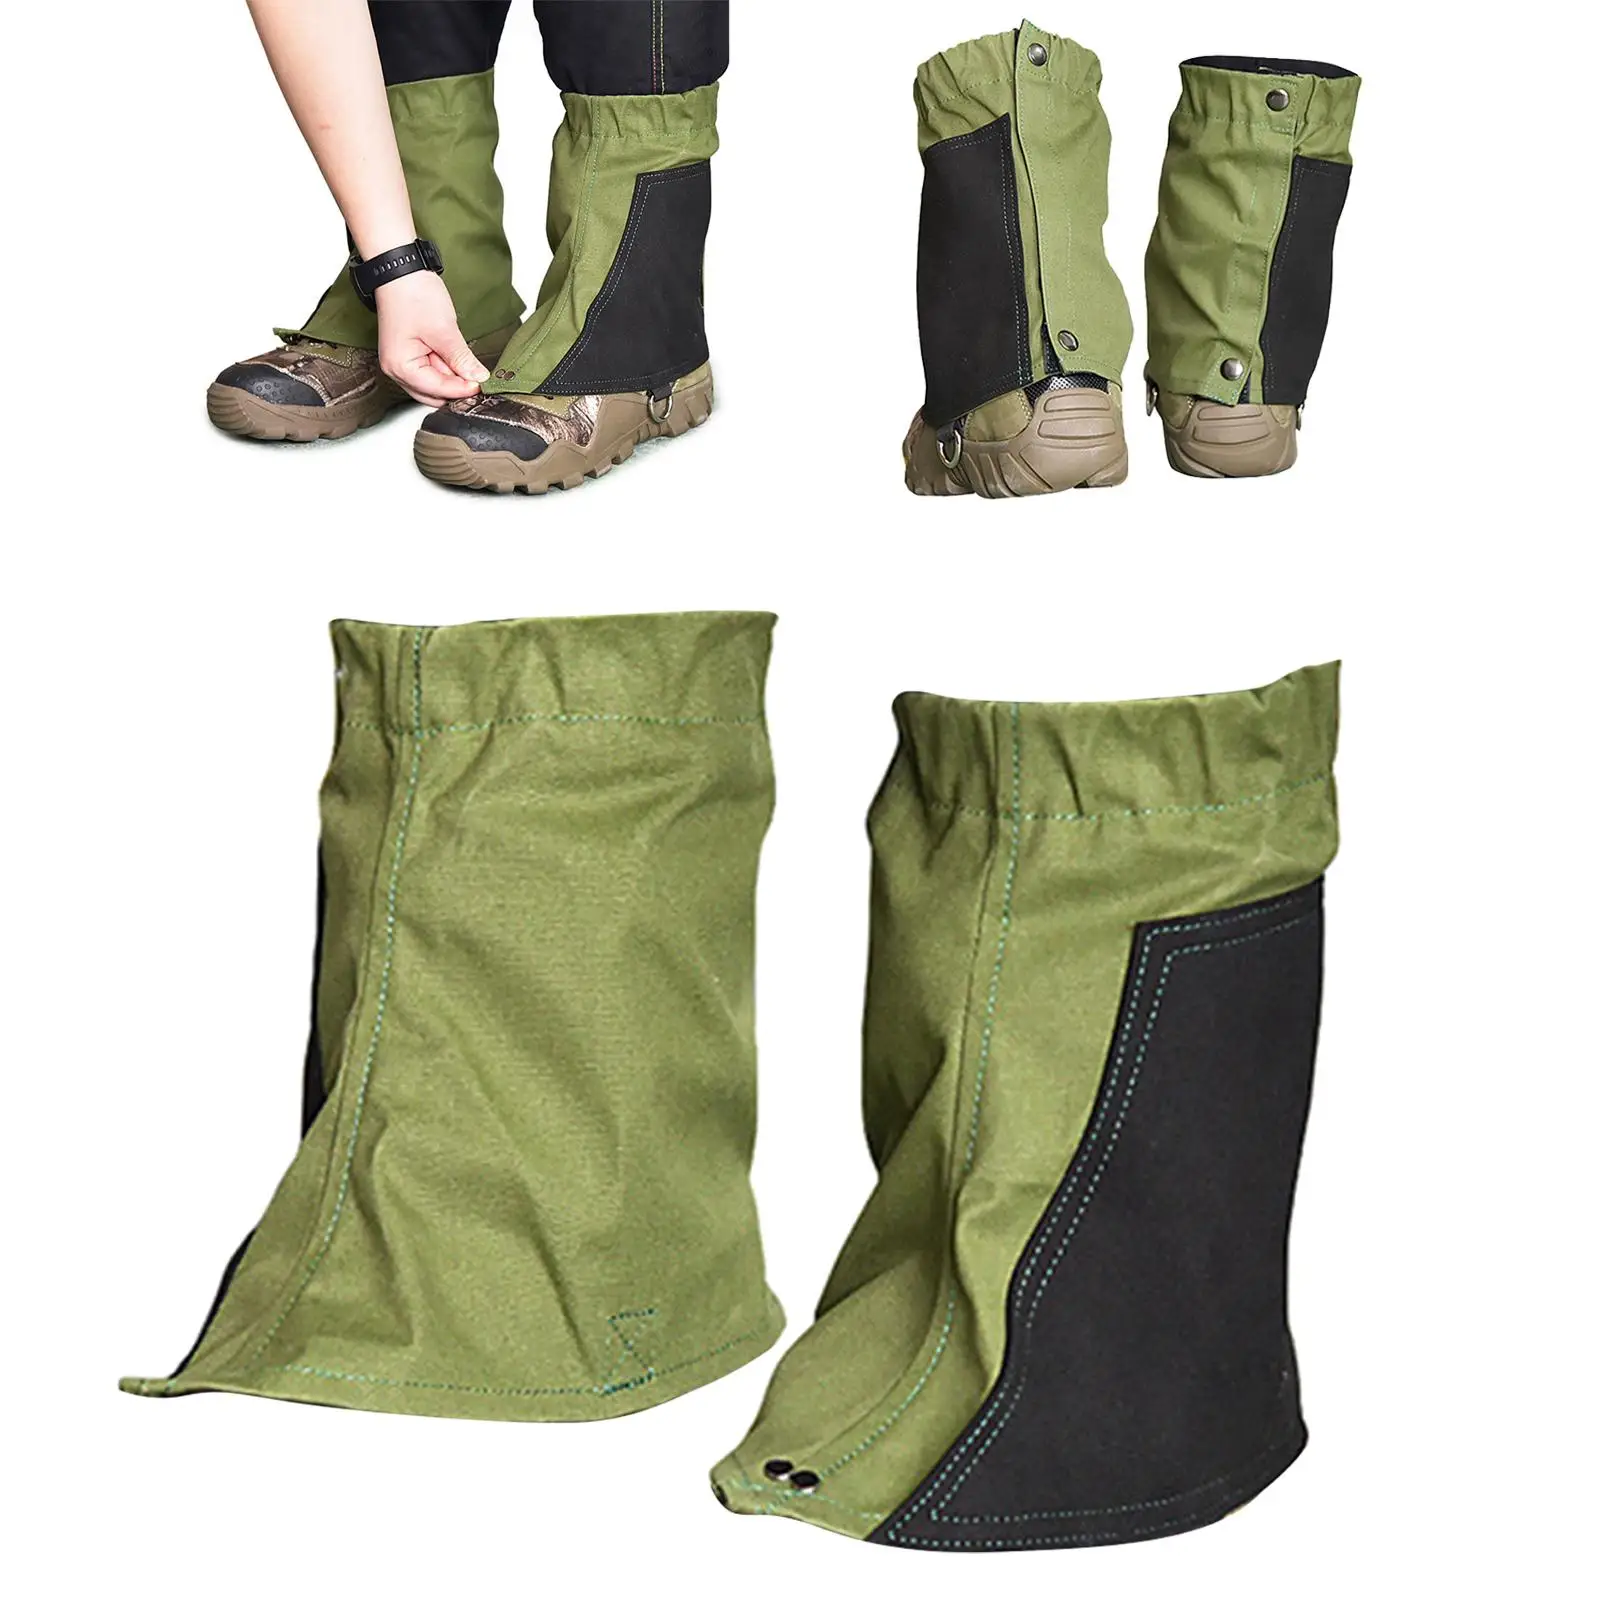    for Hiking and  Snake Bite  Guards for Legs with , Adjustable Lightweight Flexible Design fits Men and Women